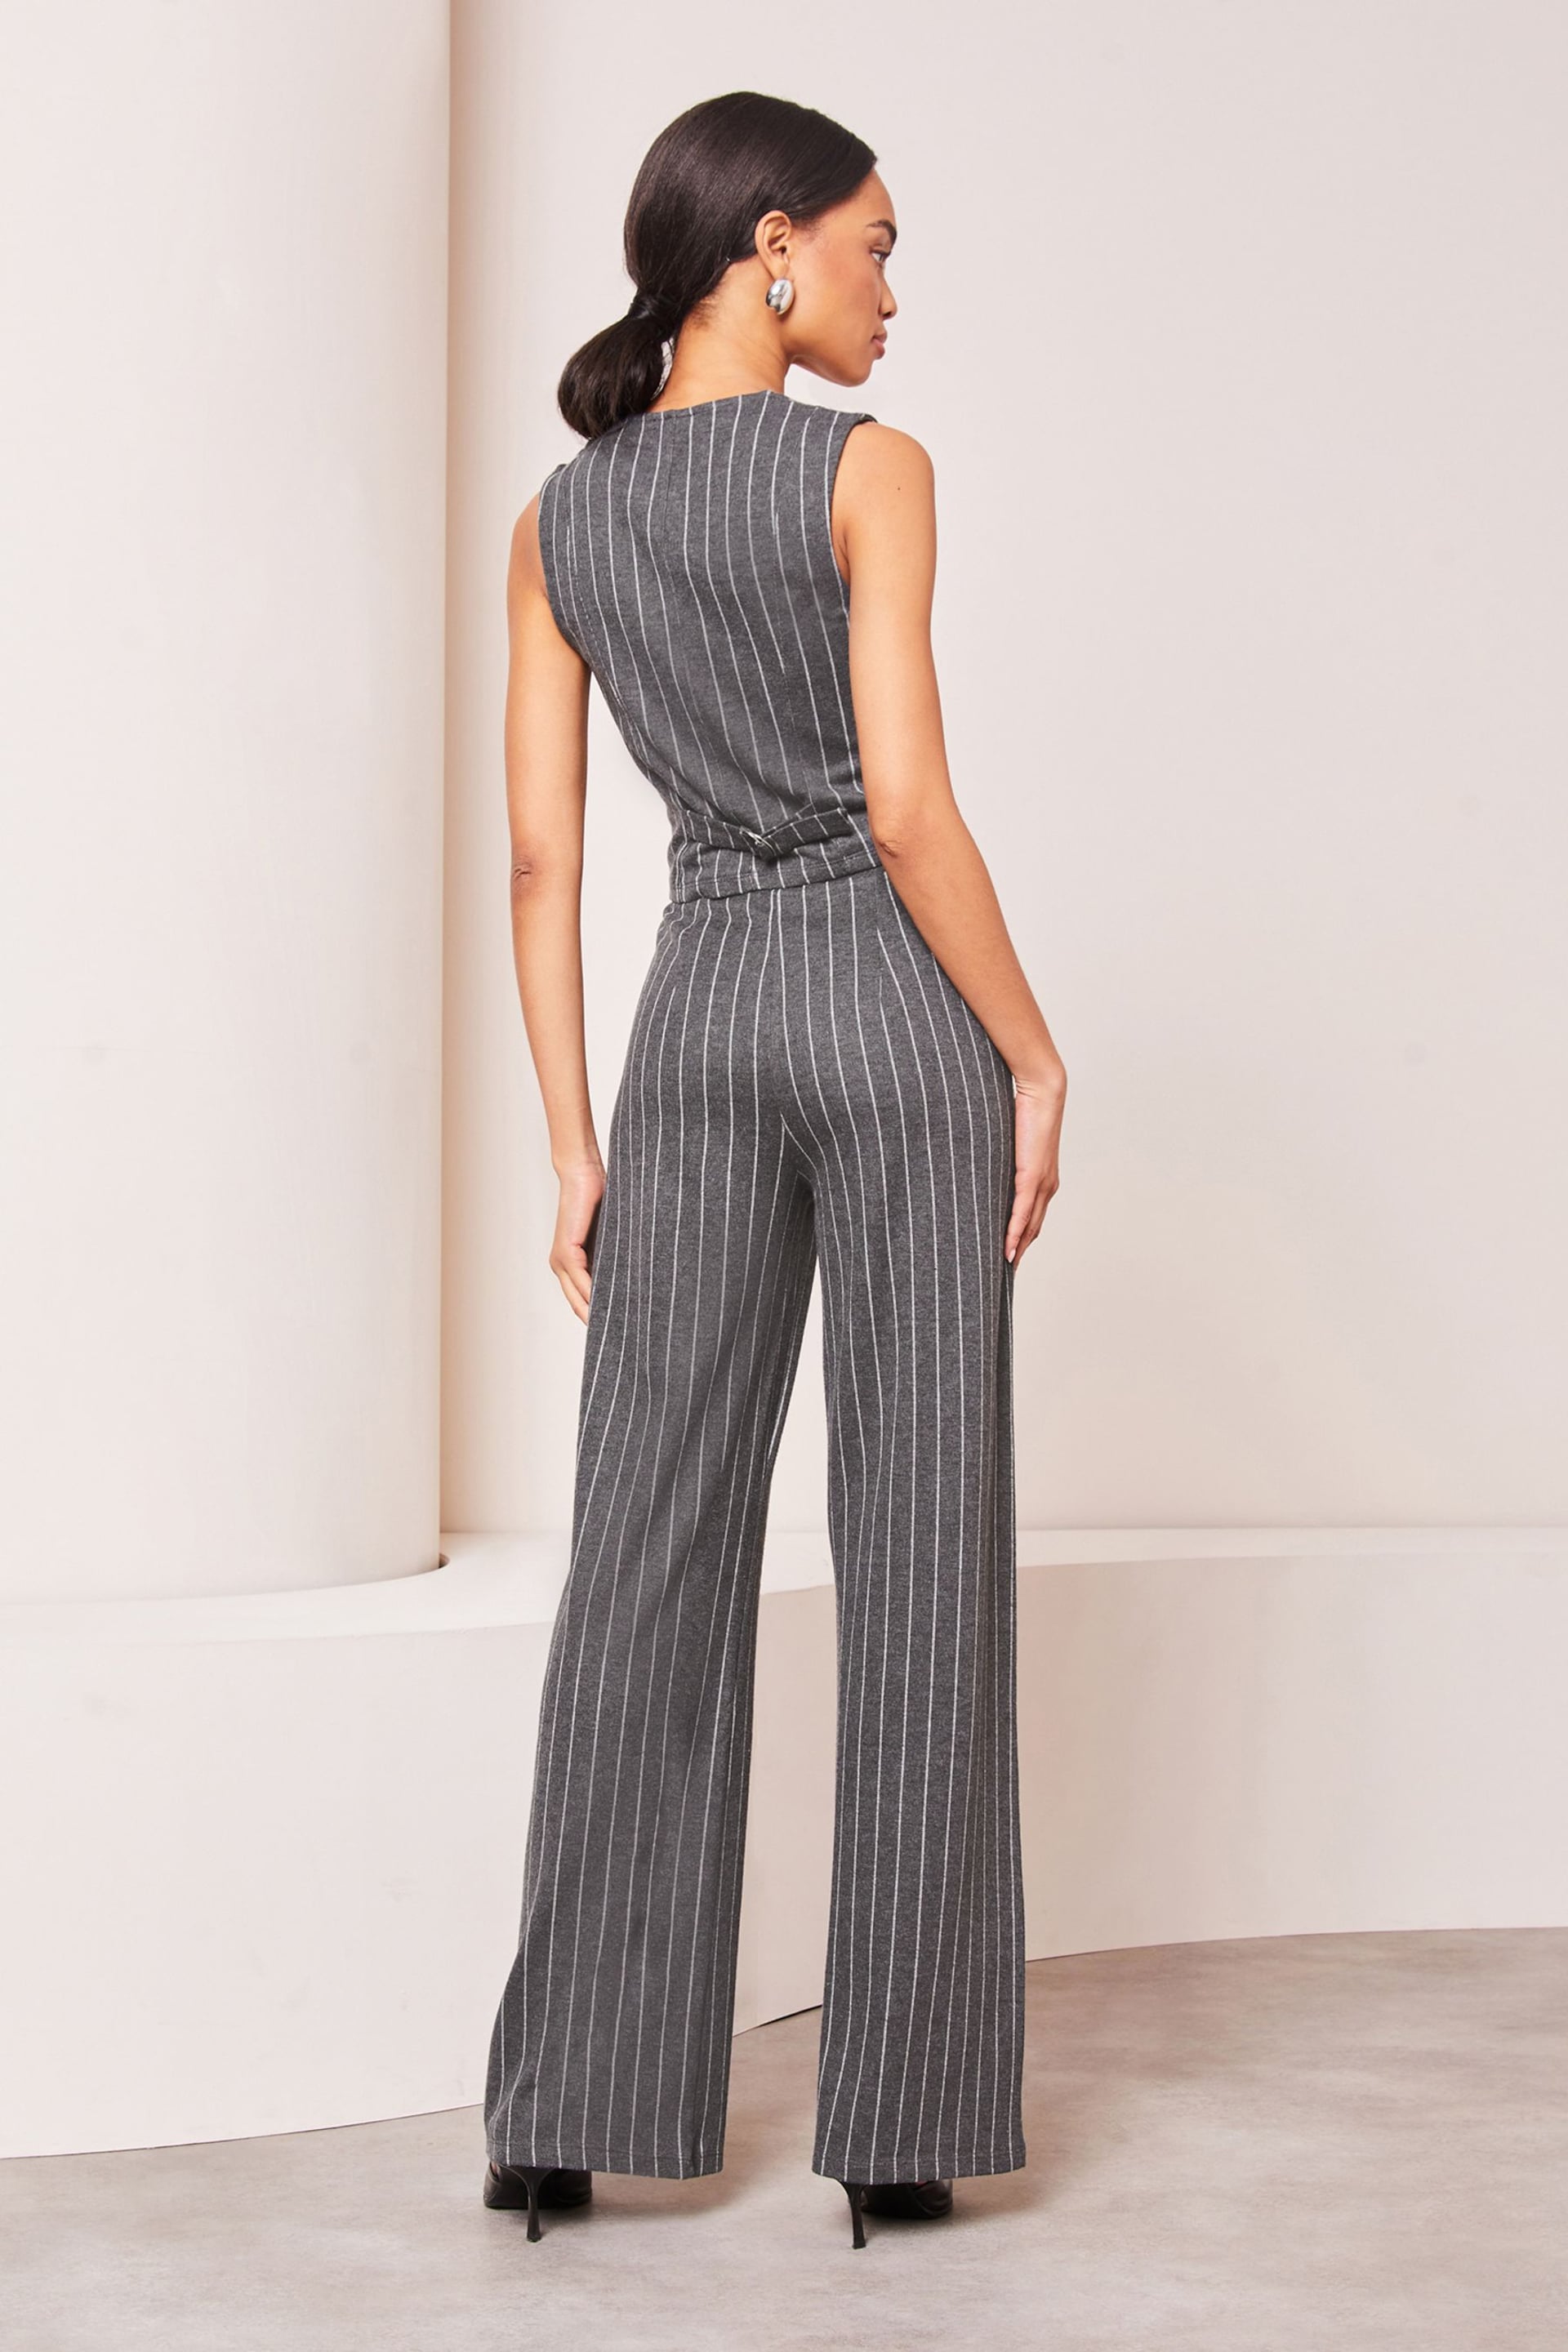 Lipsy Grey Pinstripe High Waist Wide Leg Tailored Trousers - Image 2 of 3